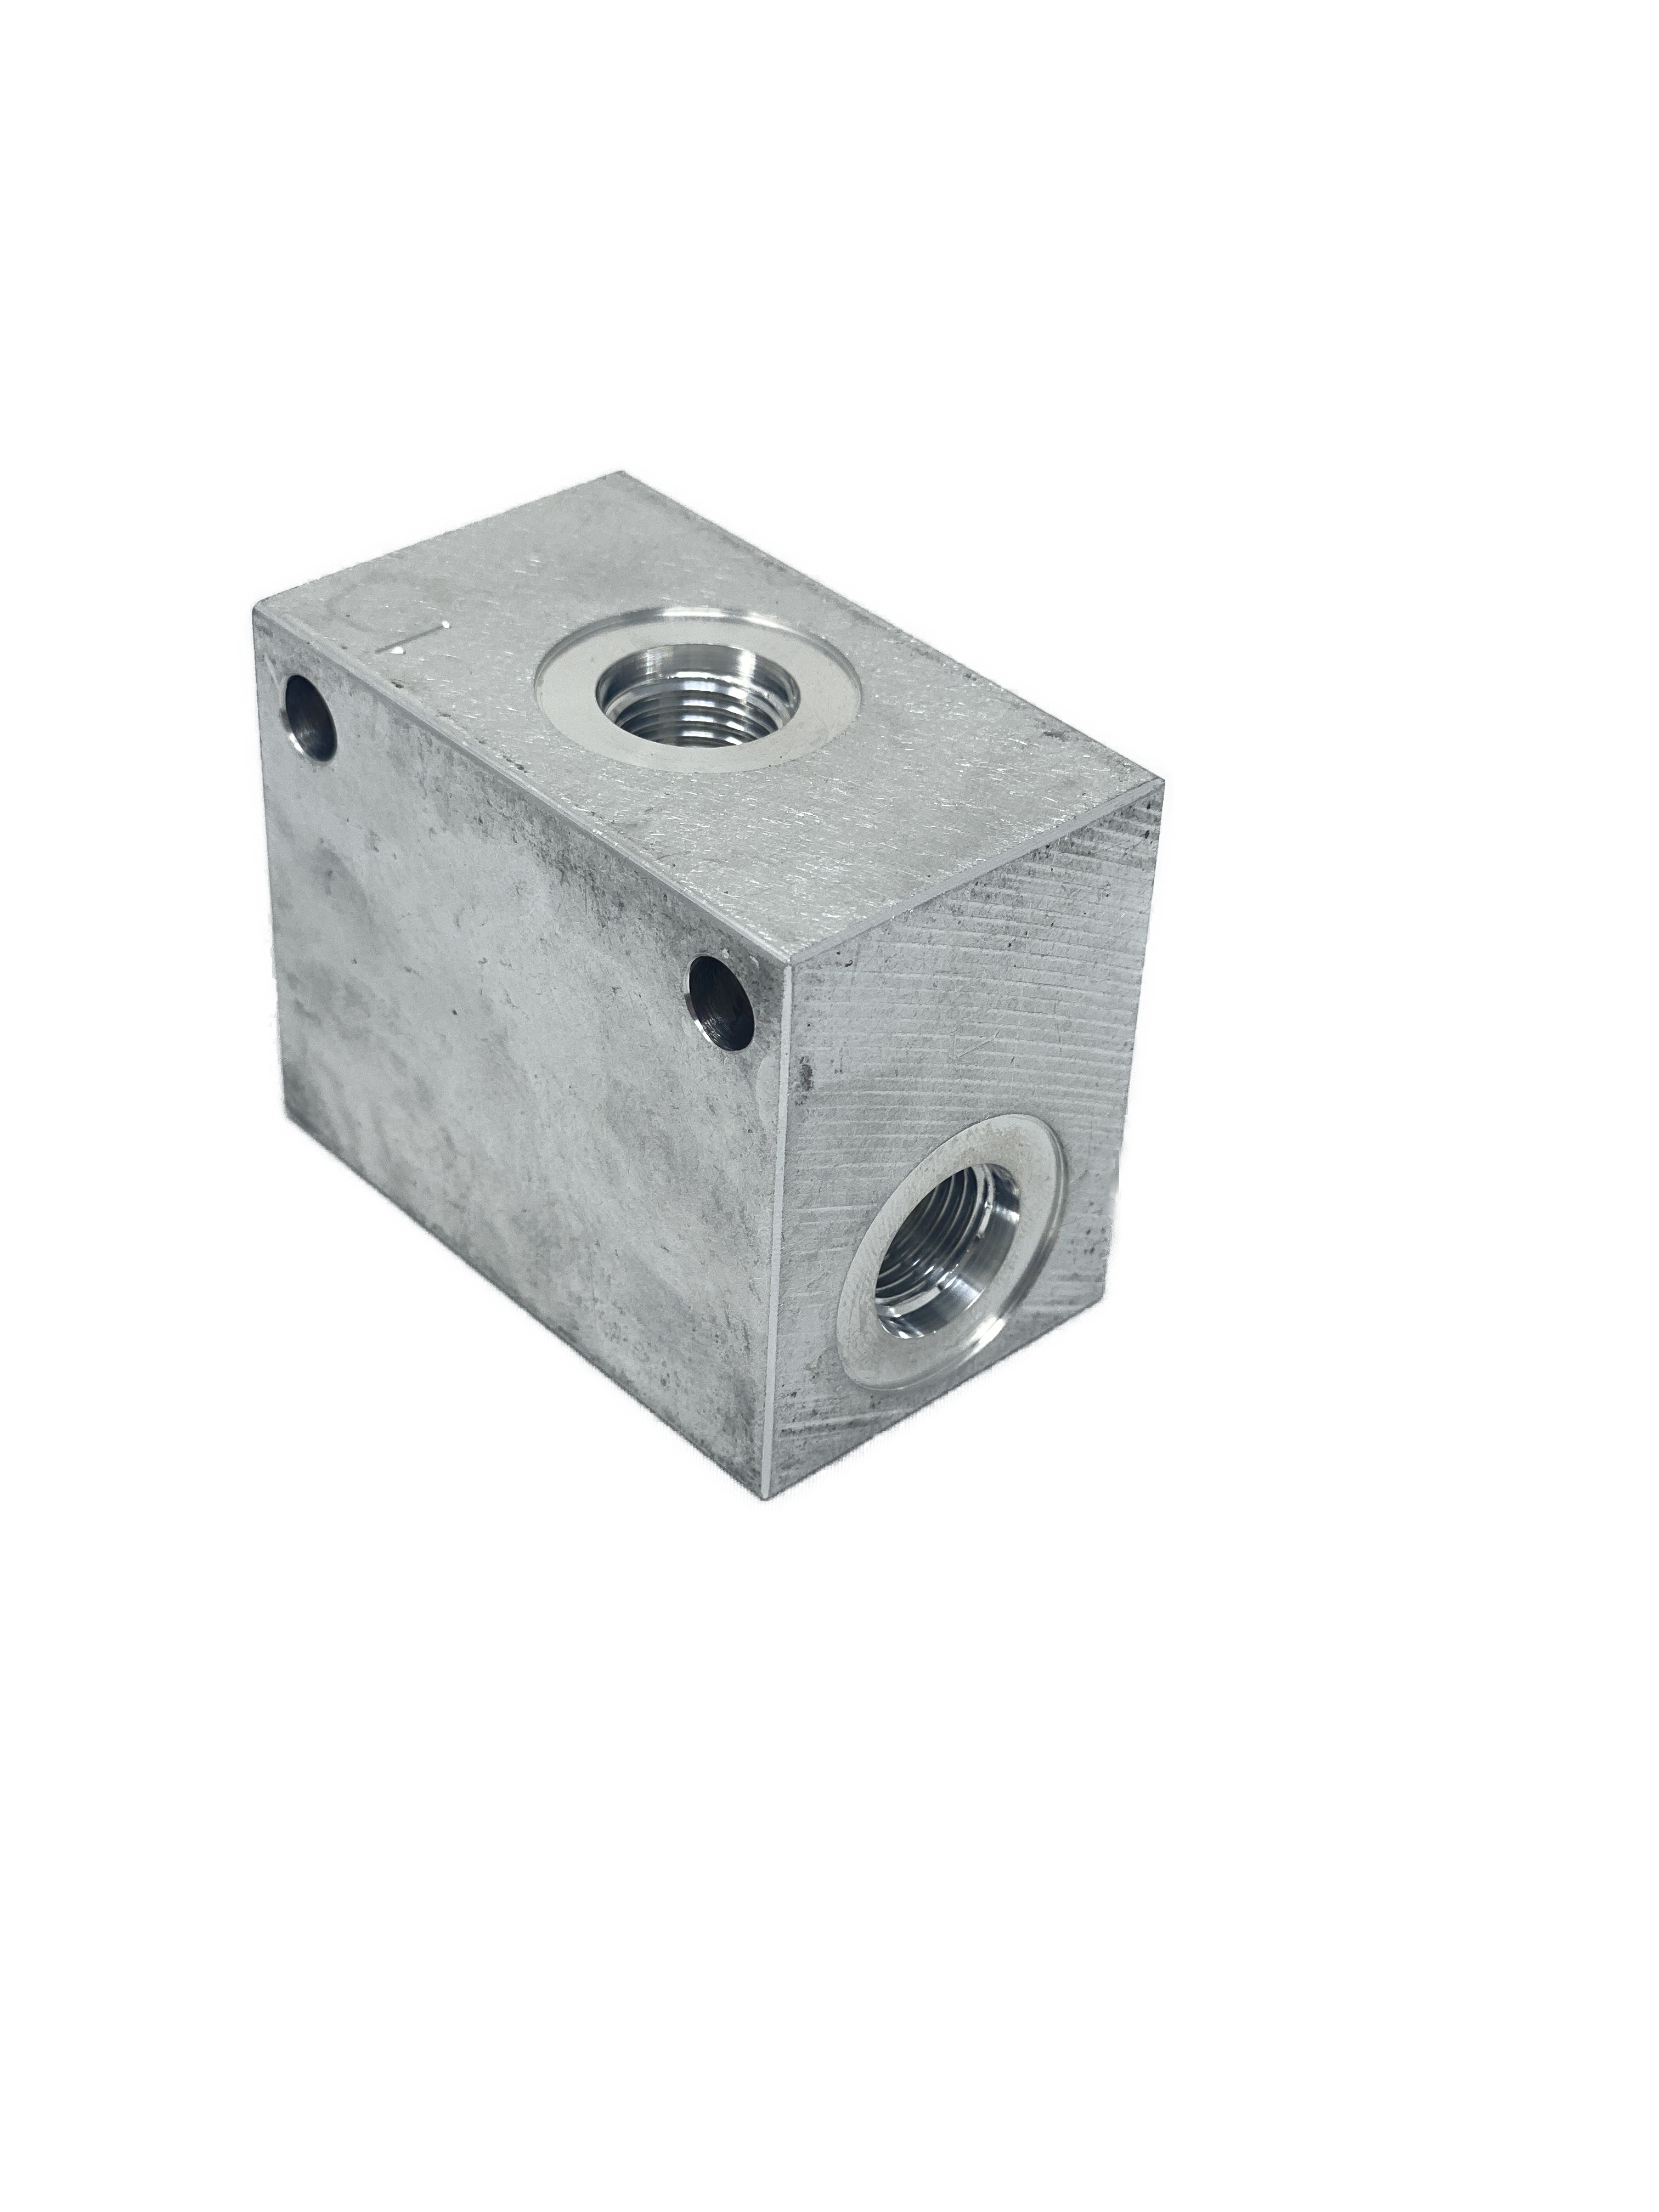 AC082CB6S : Daman Common Cavity Body, C-8-2 Cartridge Cavity, #6 SAE (3/8") Port Connections, 3000psi Rated, Aluminum, Without Gauge Port